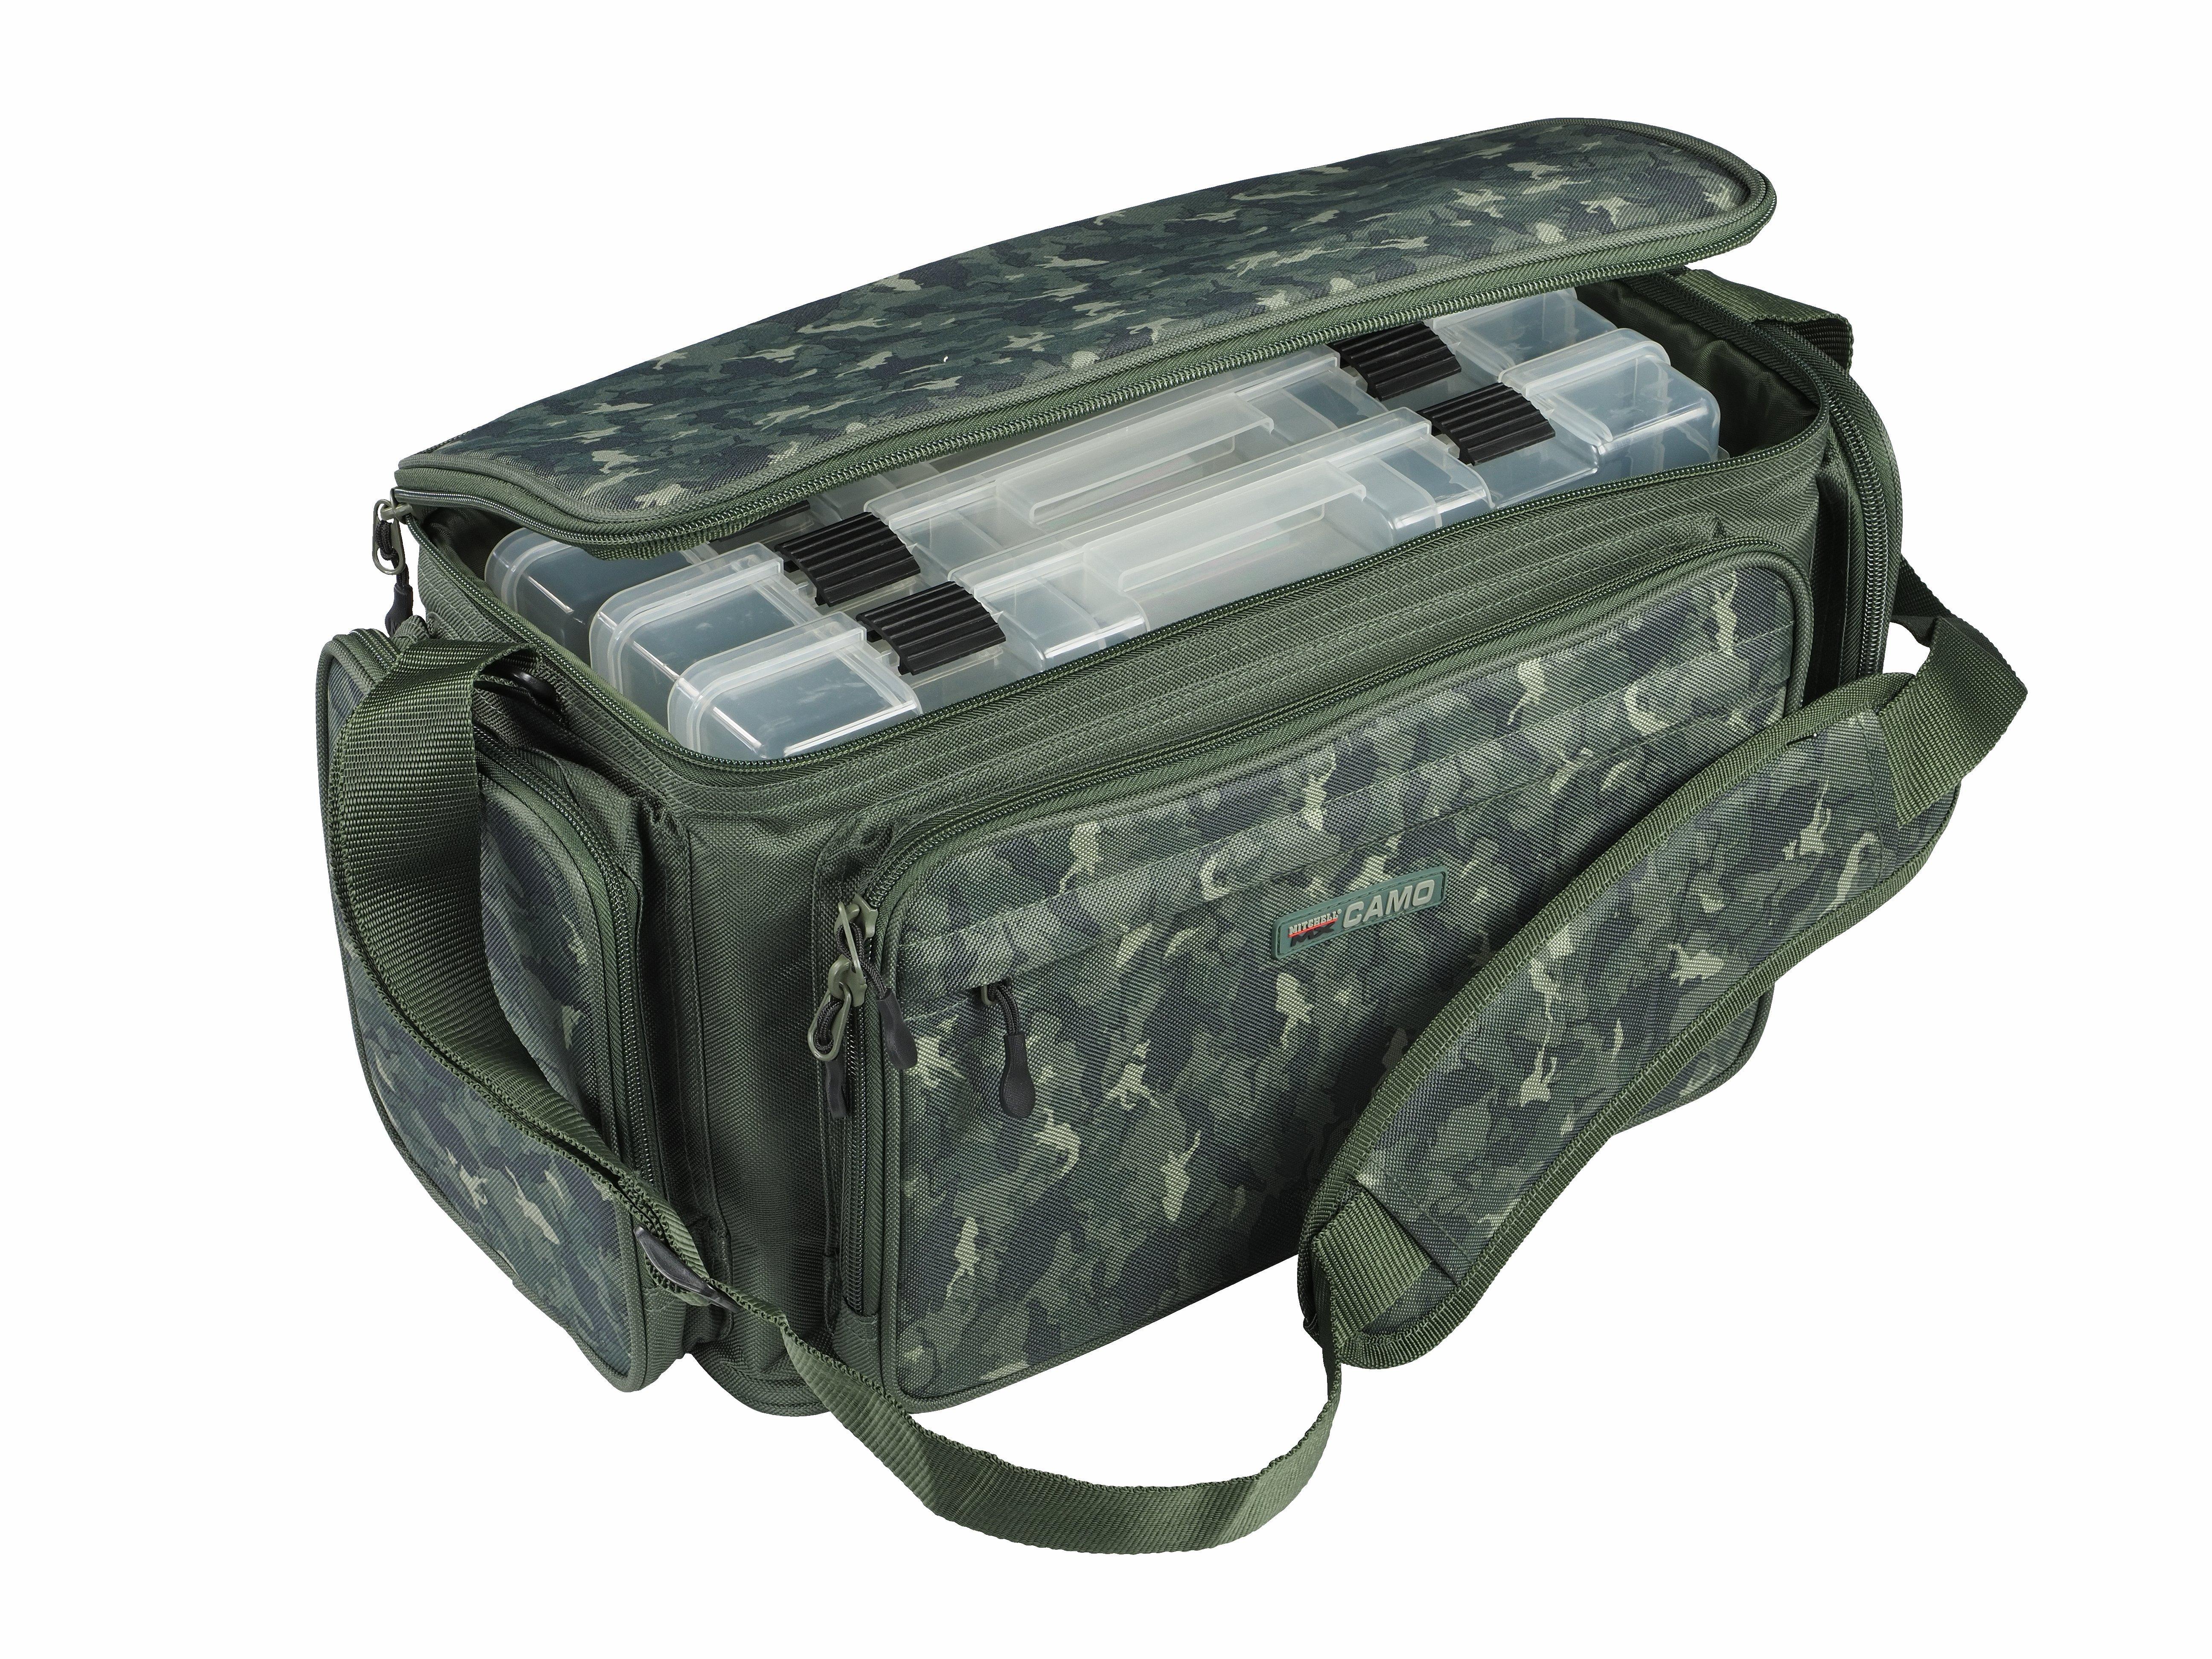 Mitchell MX Camo Tackle Fishing Bag (Incl. Tackle Boxes)